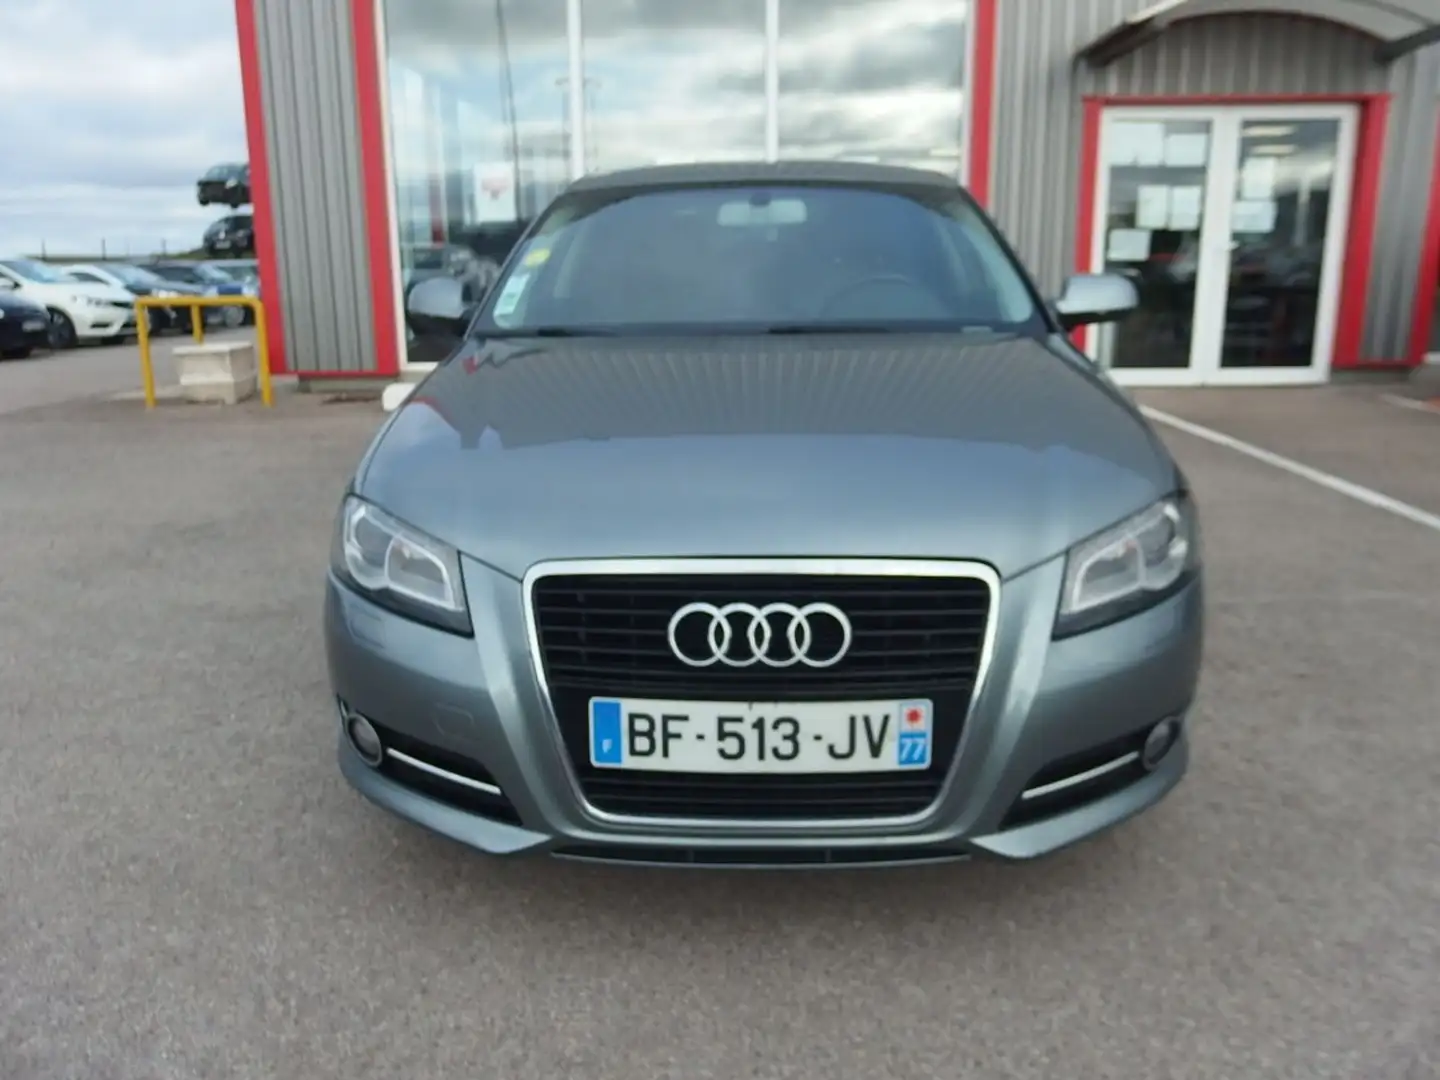 Audi A3 1.6 TDI 105CH DPF START/STOP AMBITION LUXE S TRONI - 2